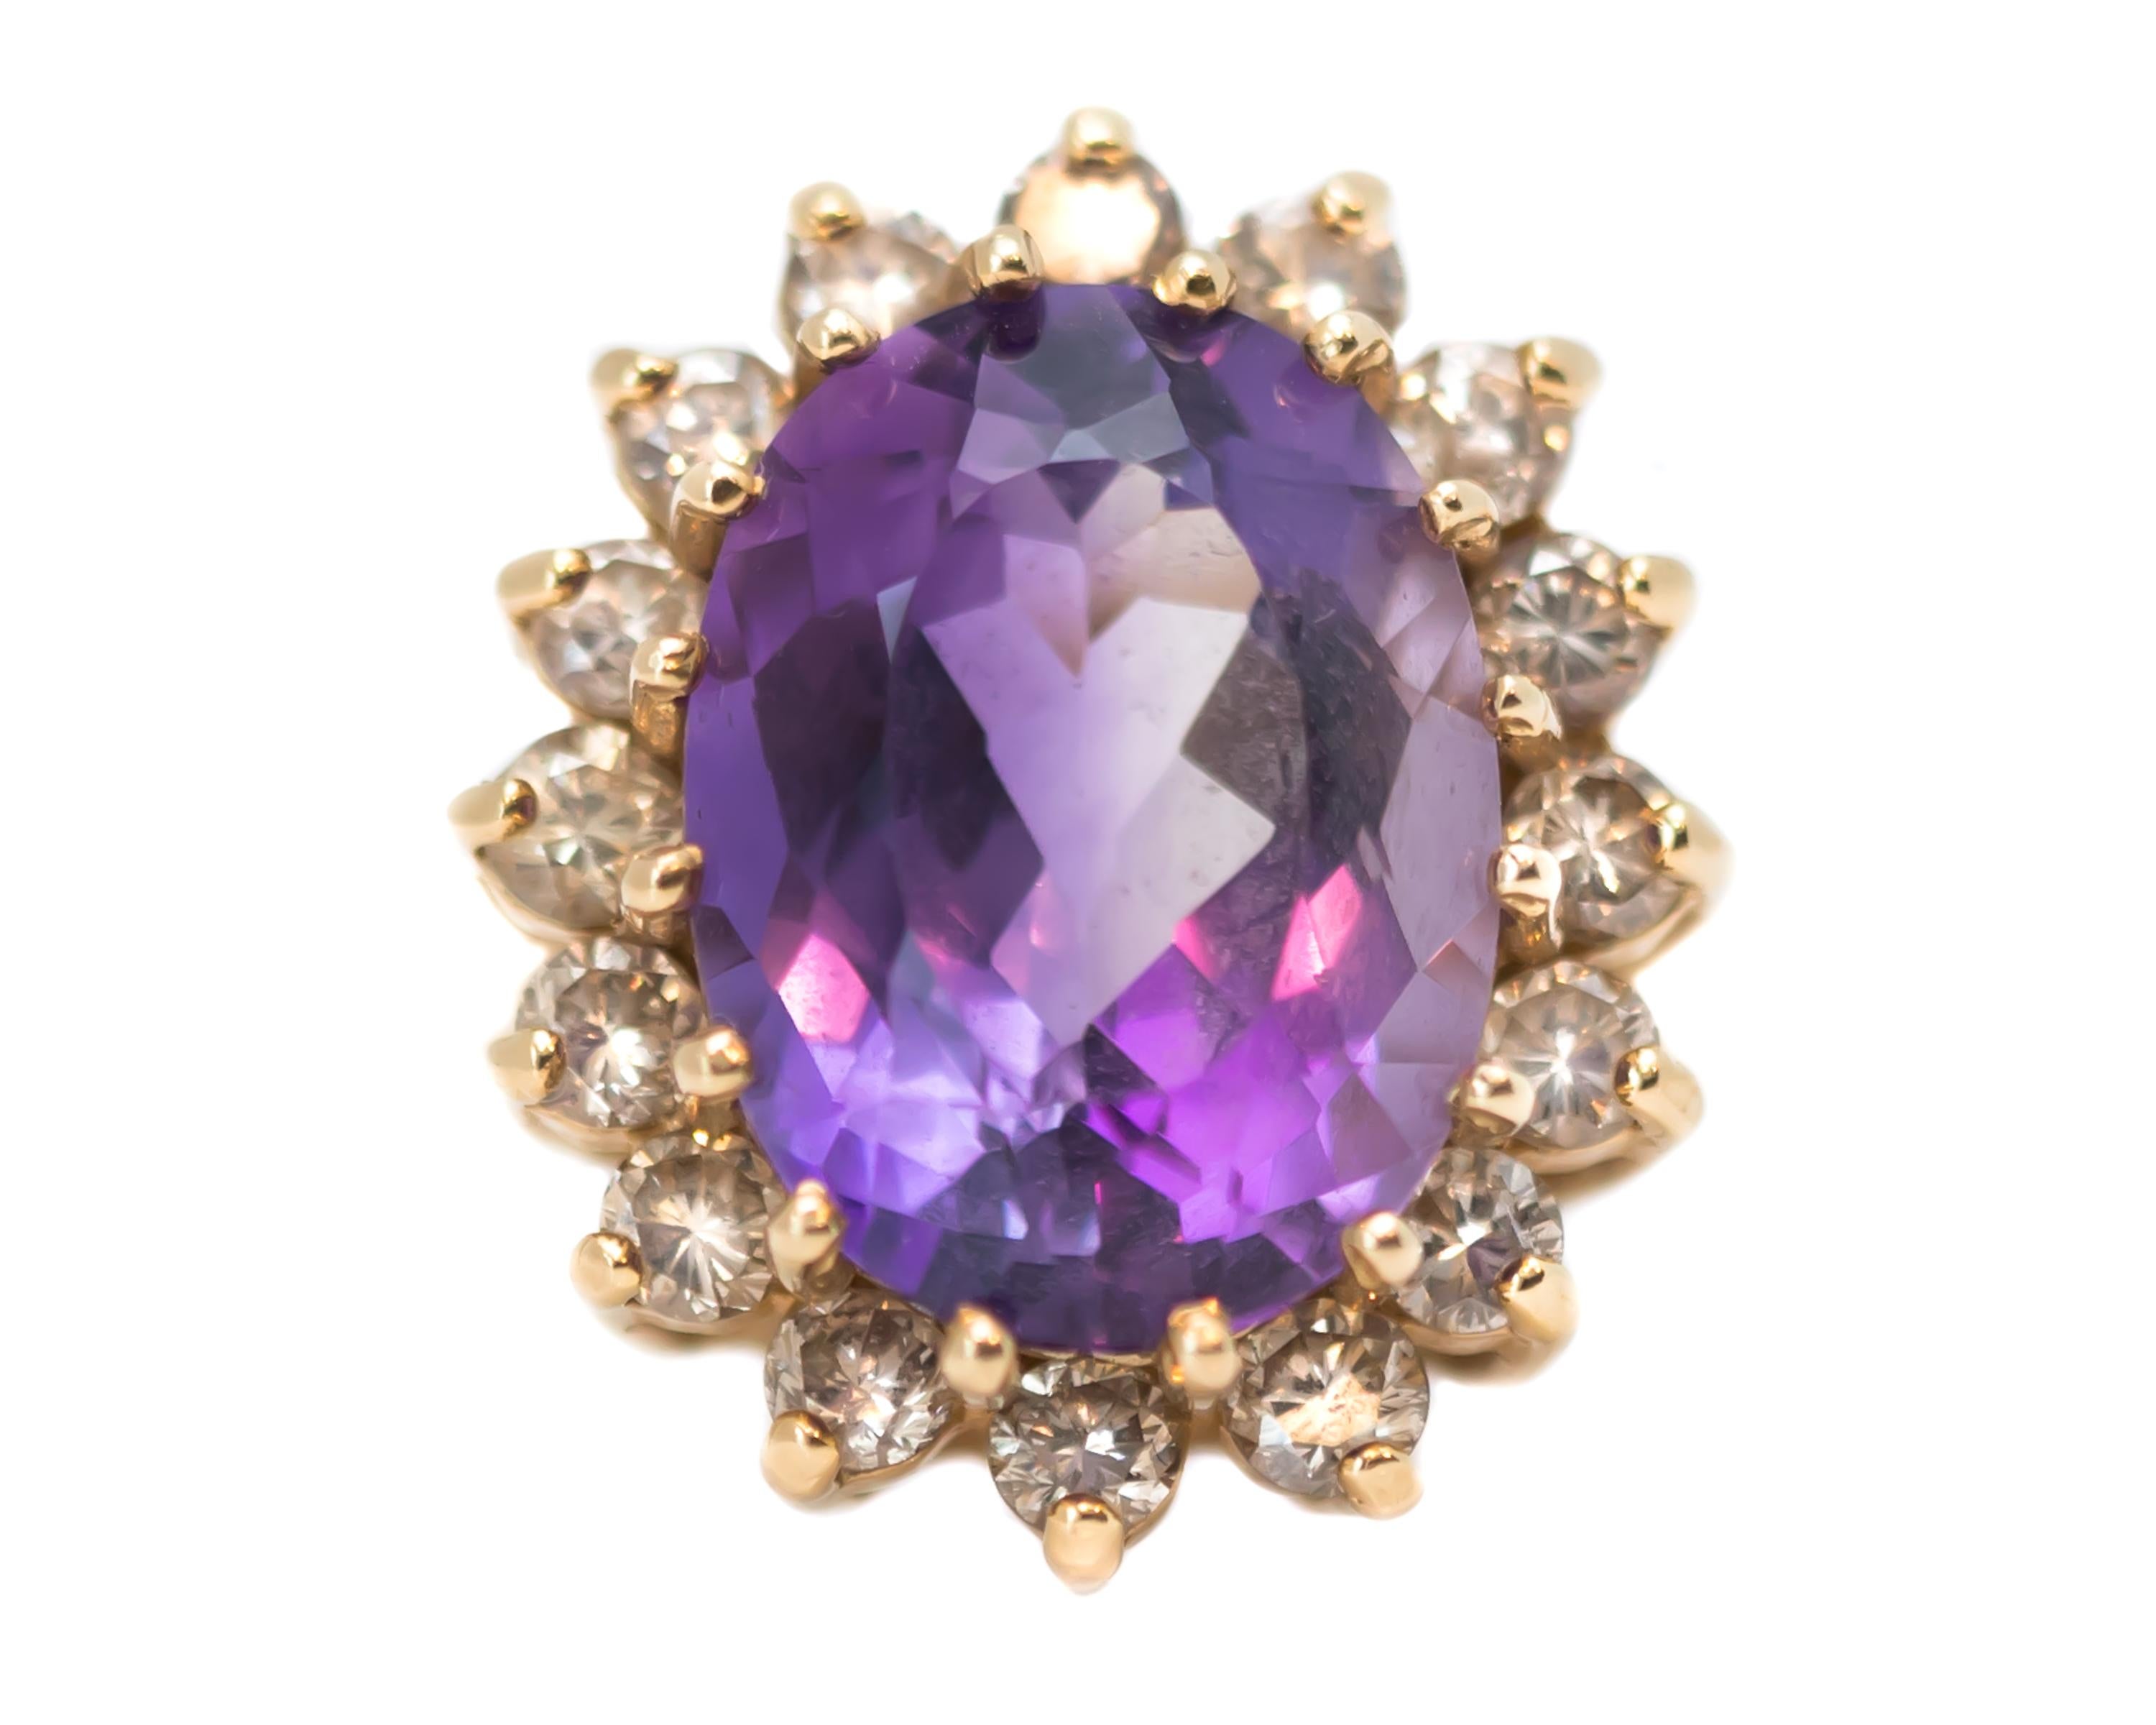 Oval Cut 1950s 6 Carat Amethyst Ring with Diamond Halo and 14 Karat Yellow Gold